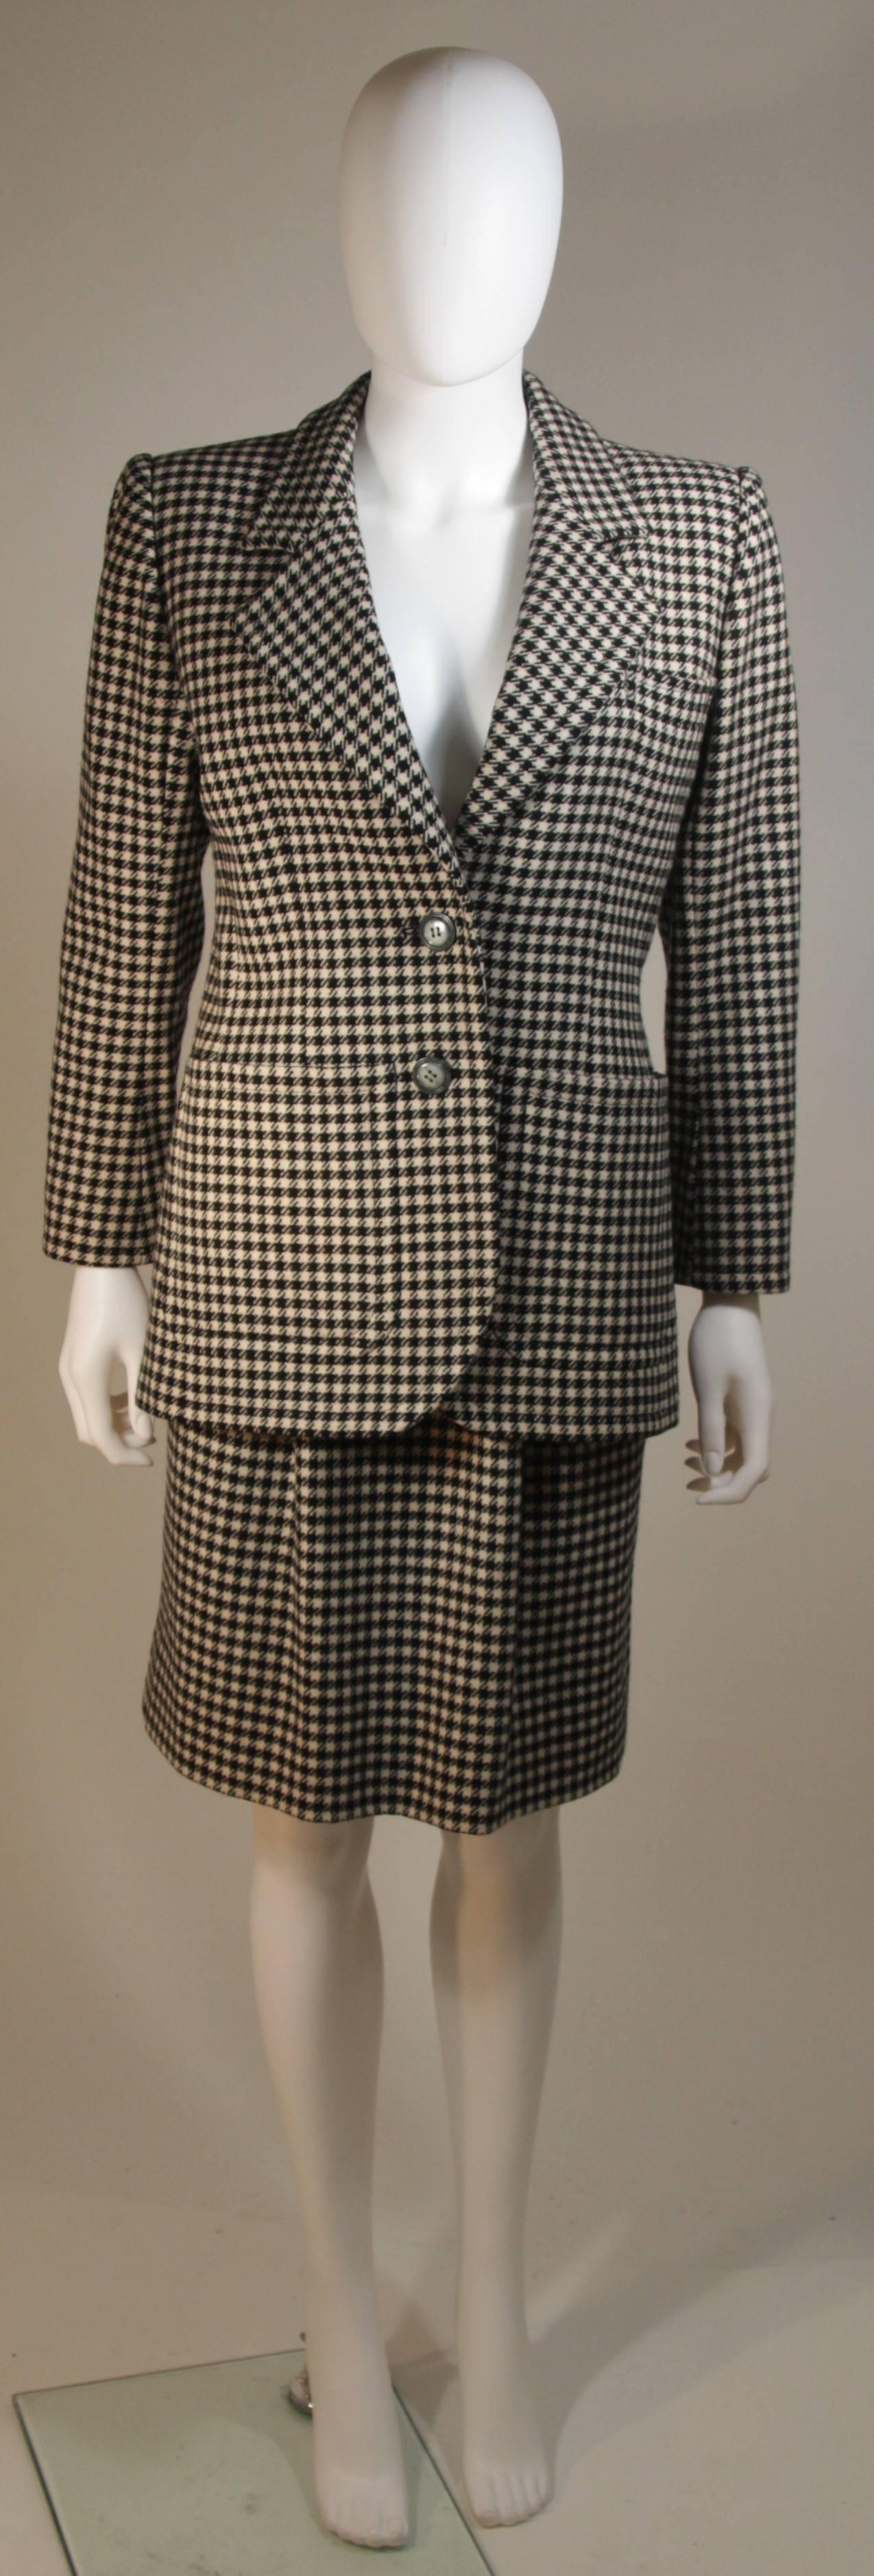 This Yves Saint Laurent skirt suit is composed of a black and white wool featuring a houndstooth print. The jacket has center front button closures. The skirt has a zipper closure. In excellent condition. 

**Please cross-reference measurements